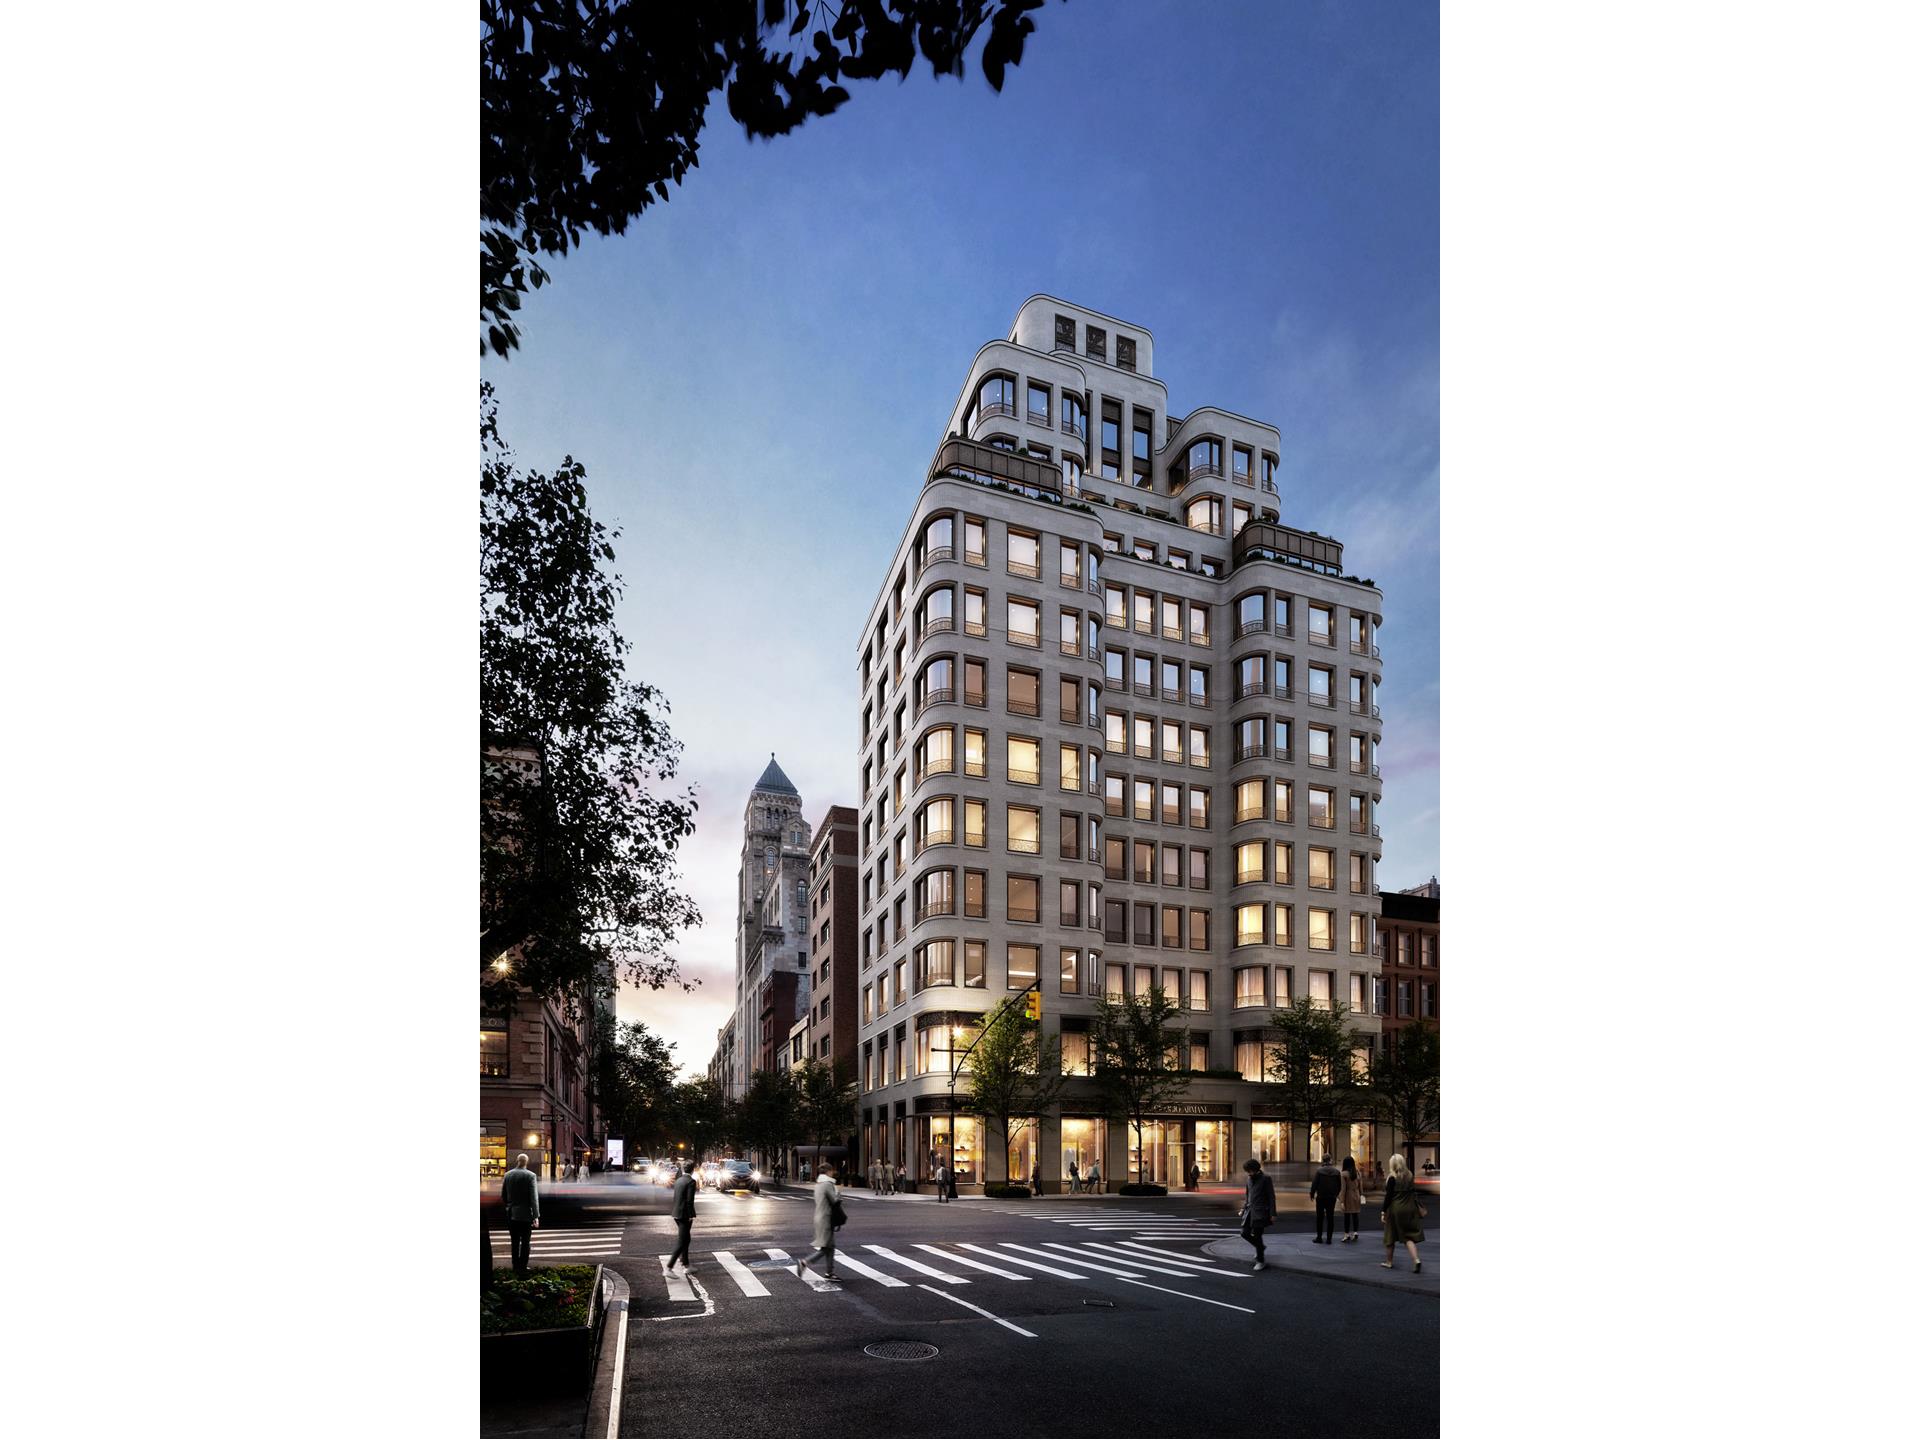 760 Madison Avenue Ph11, Lenox Hill, Upper East Side, NYC - 4 Bedrooms  
4.5 Bathrooms  
8 Rooms - 